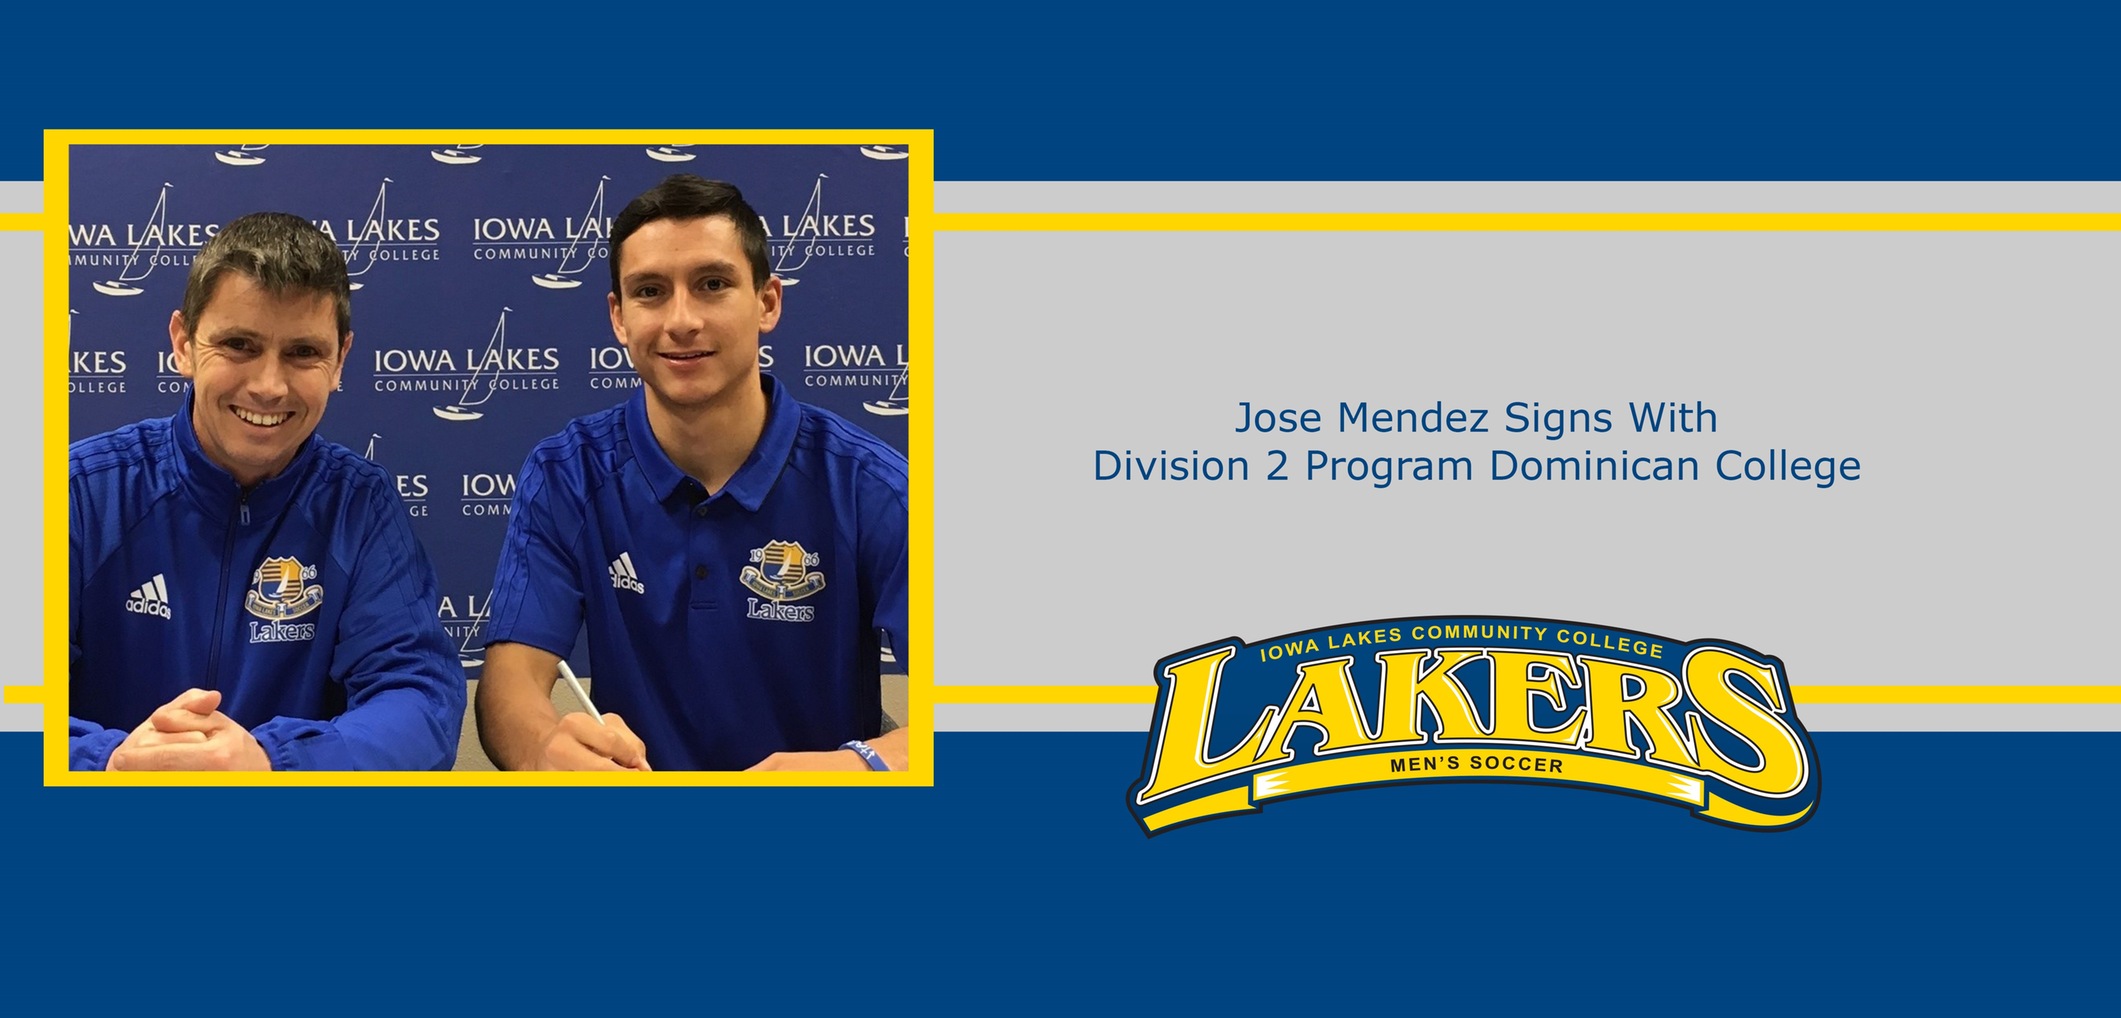 Jose Mendez Signs with NCAA Division 2 Program Dominican College